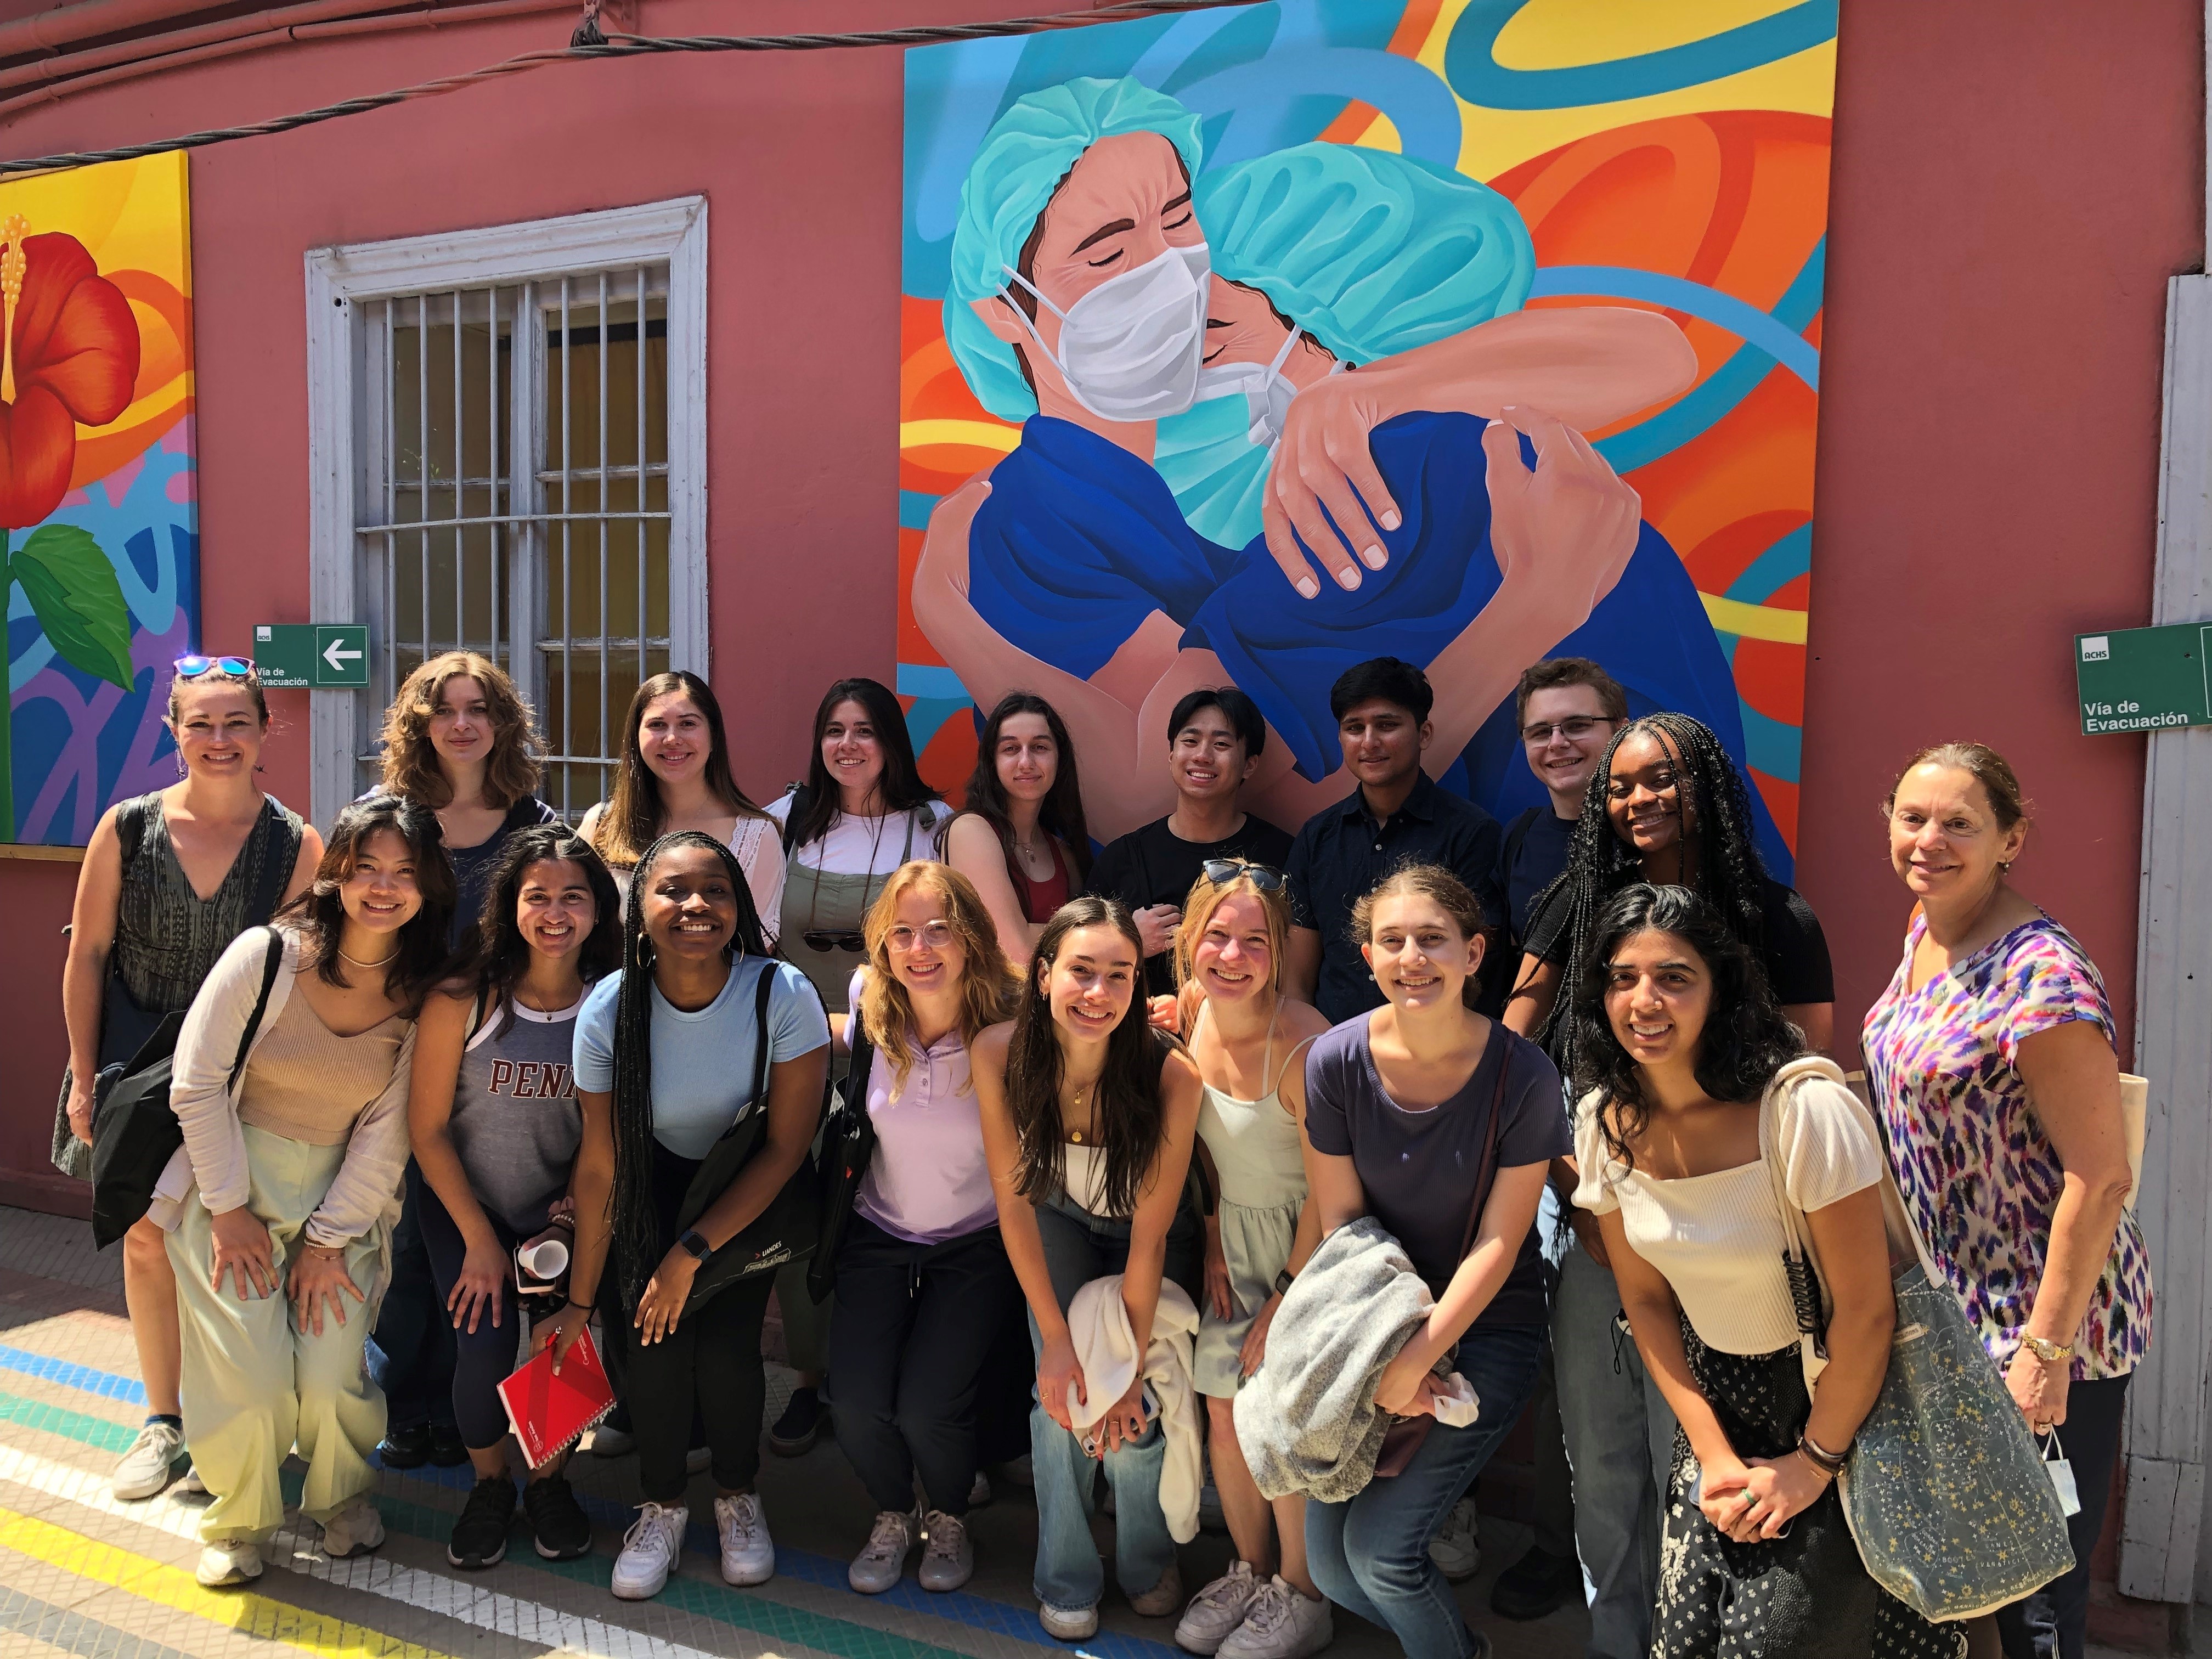 Group photo of Penn students in front of a mural depicting hospital workers embracing.